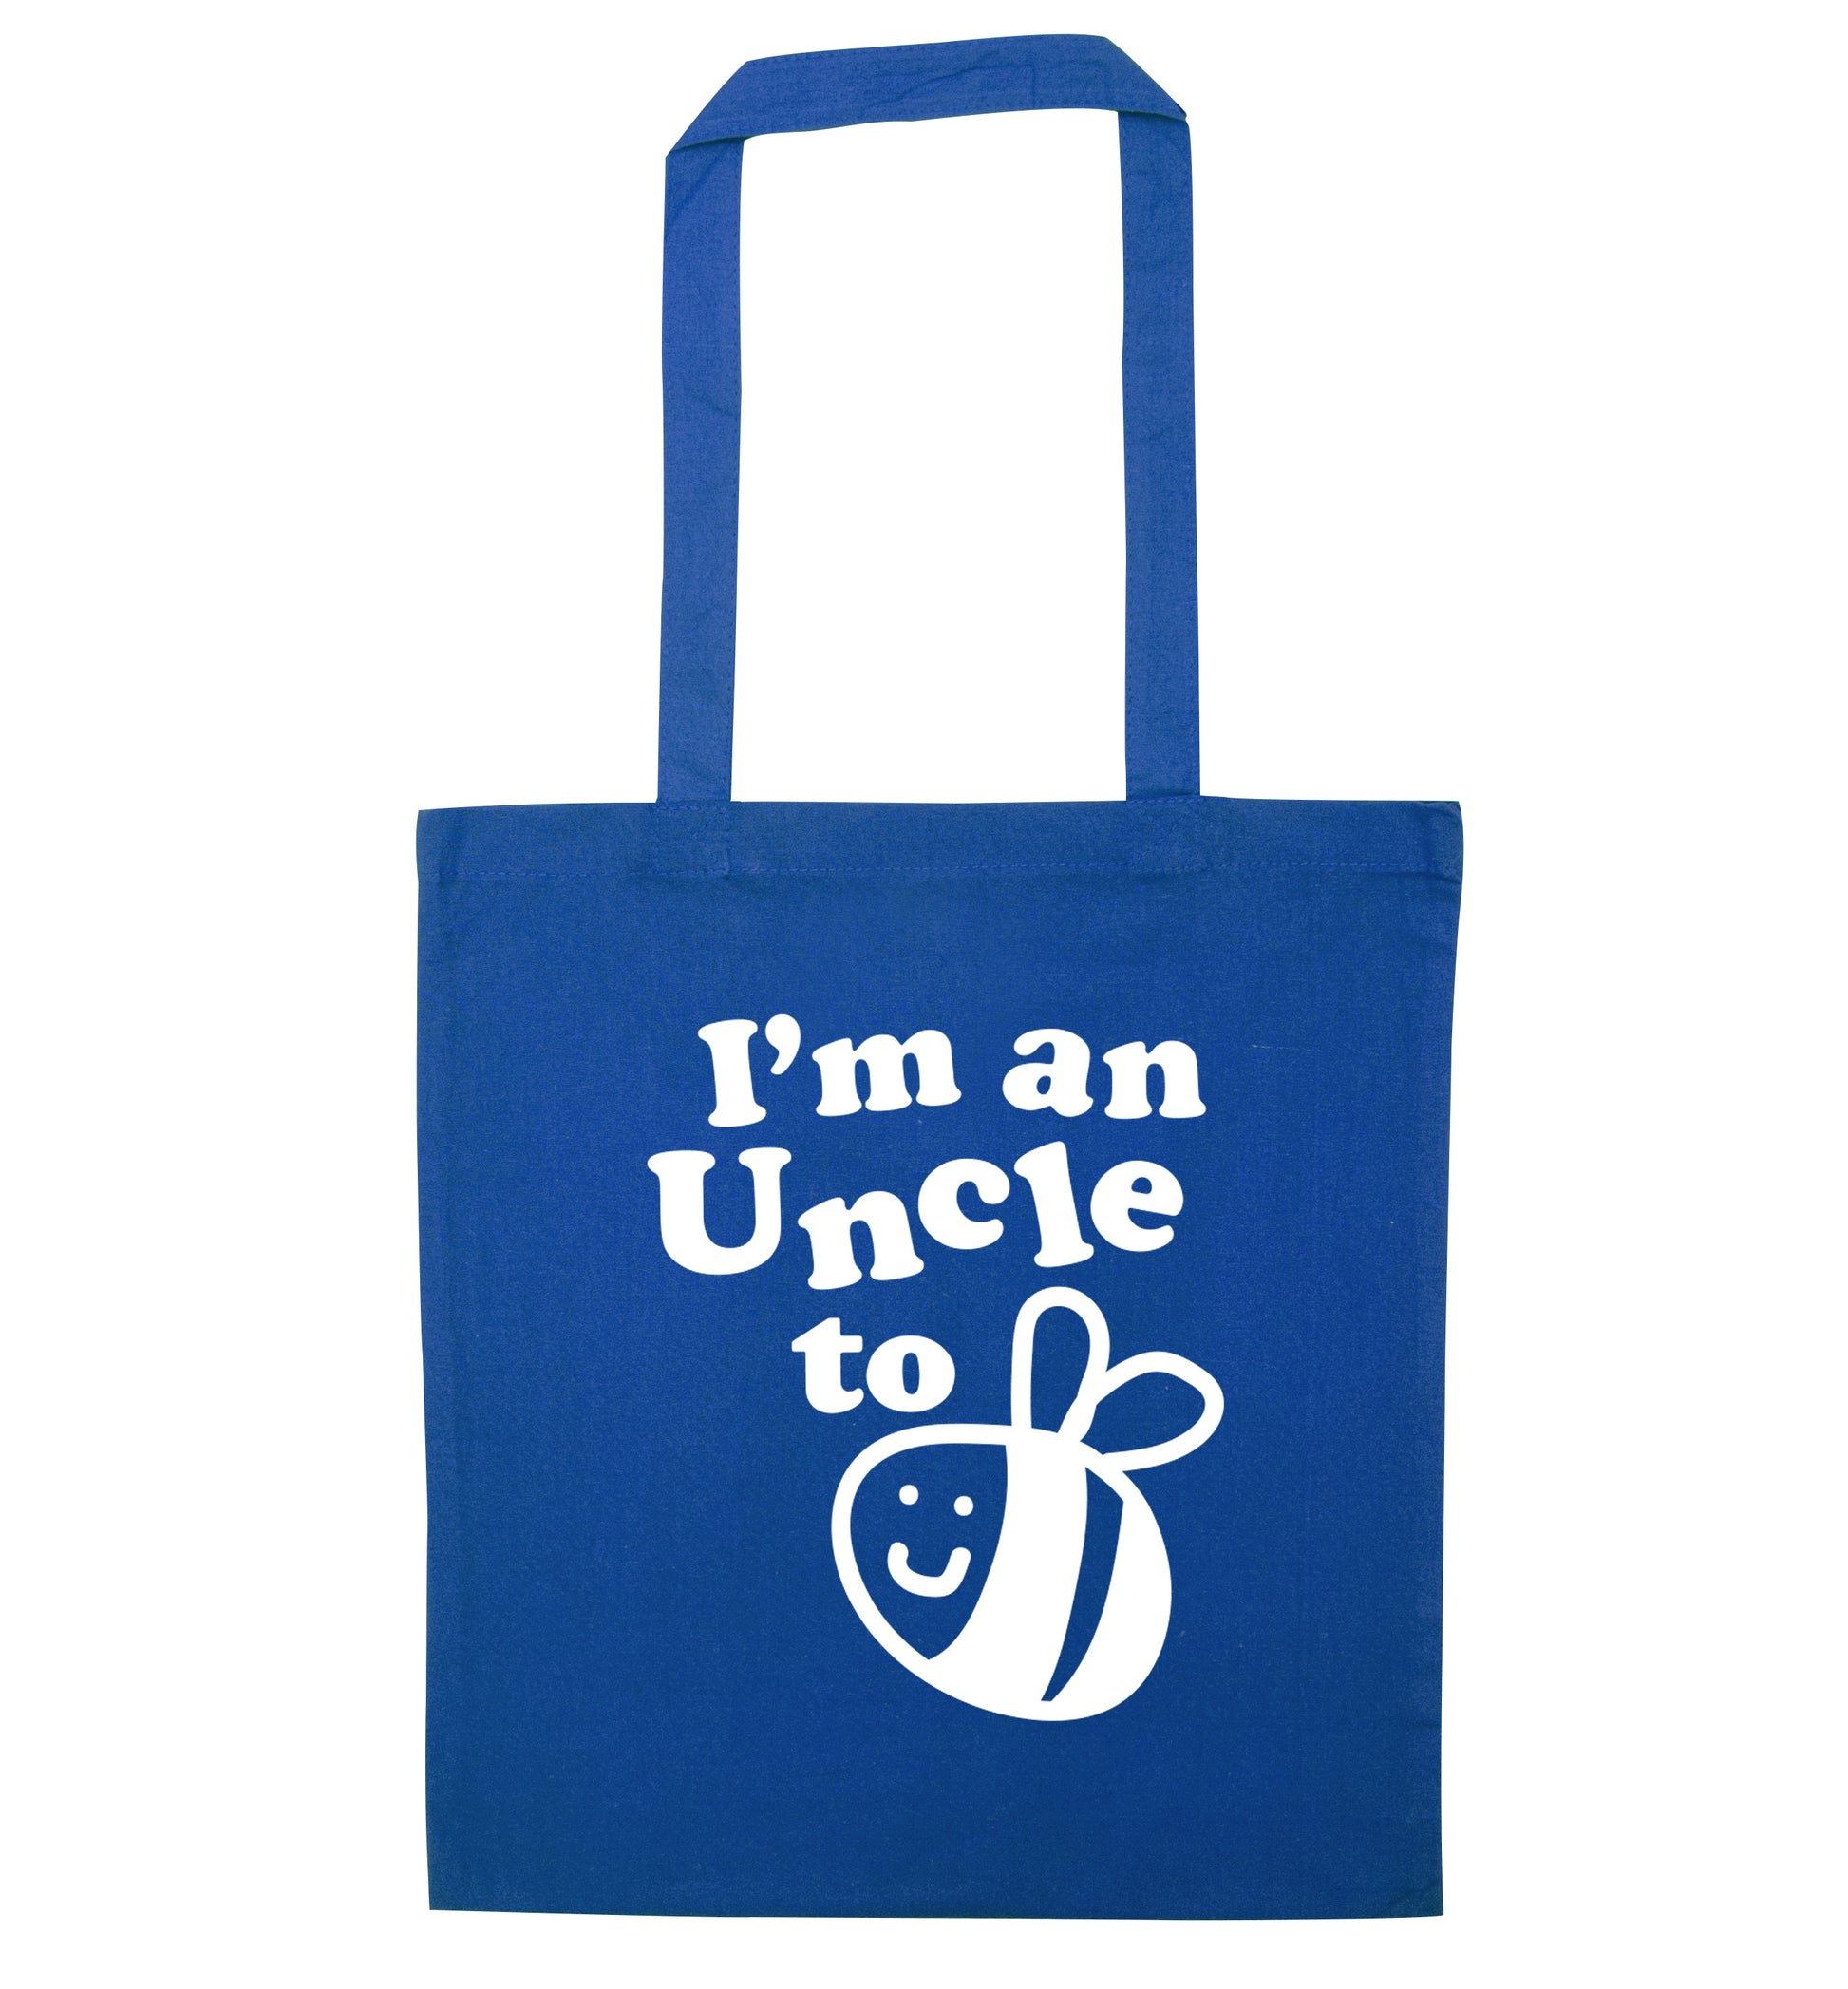 I'm an uncle to be blue tote bag